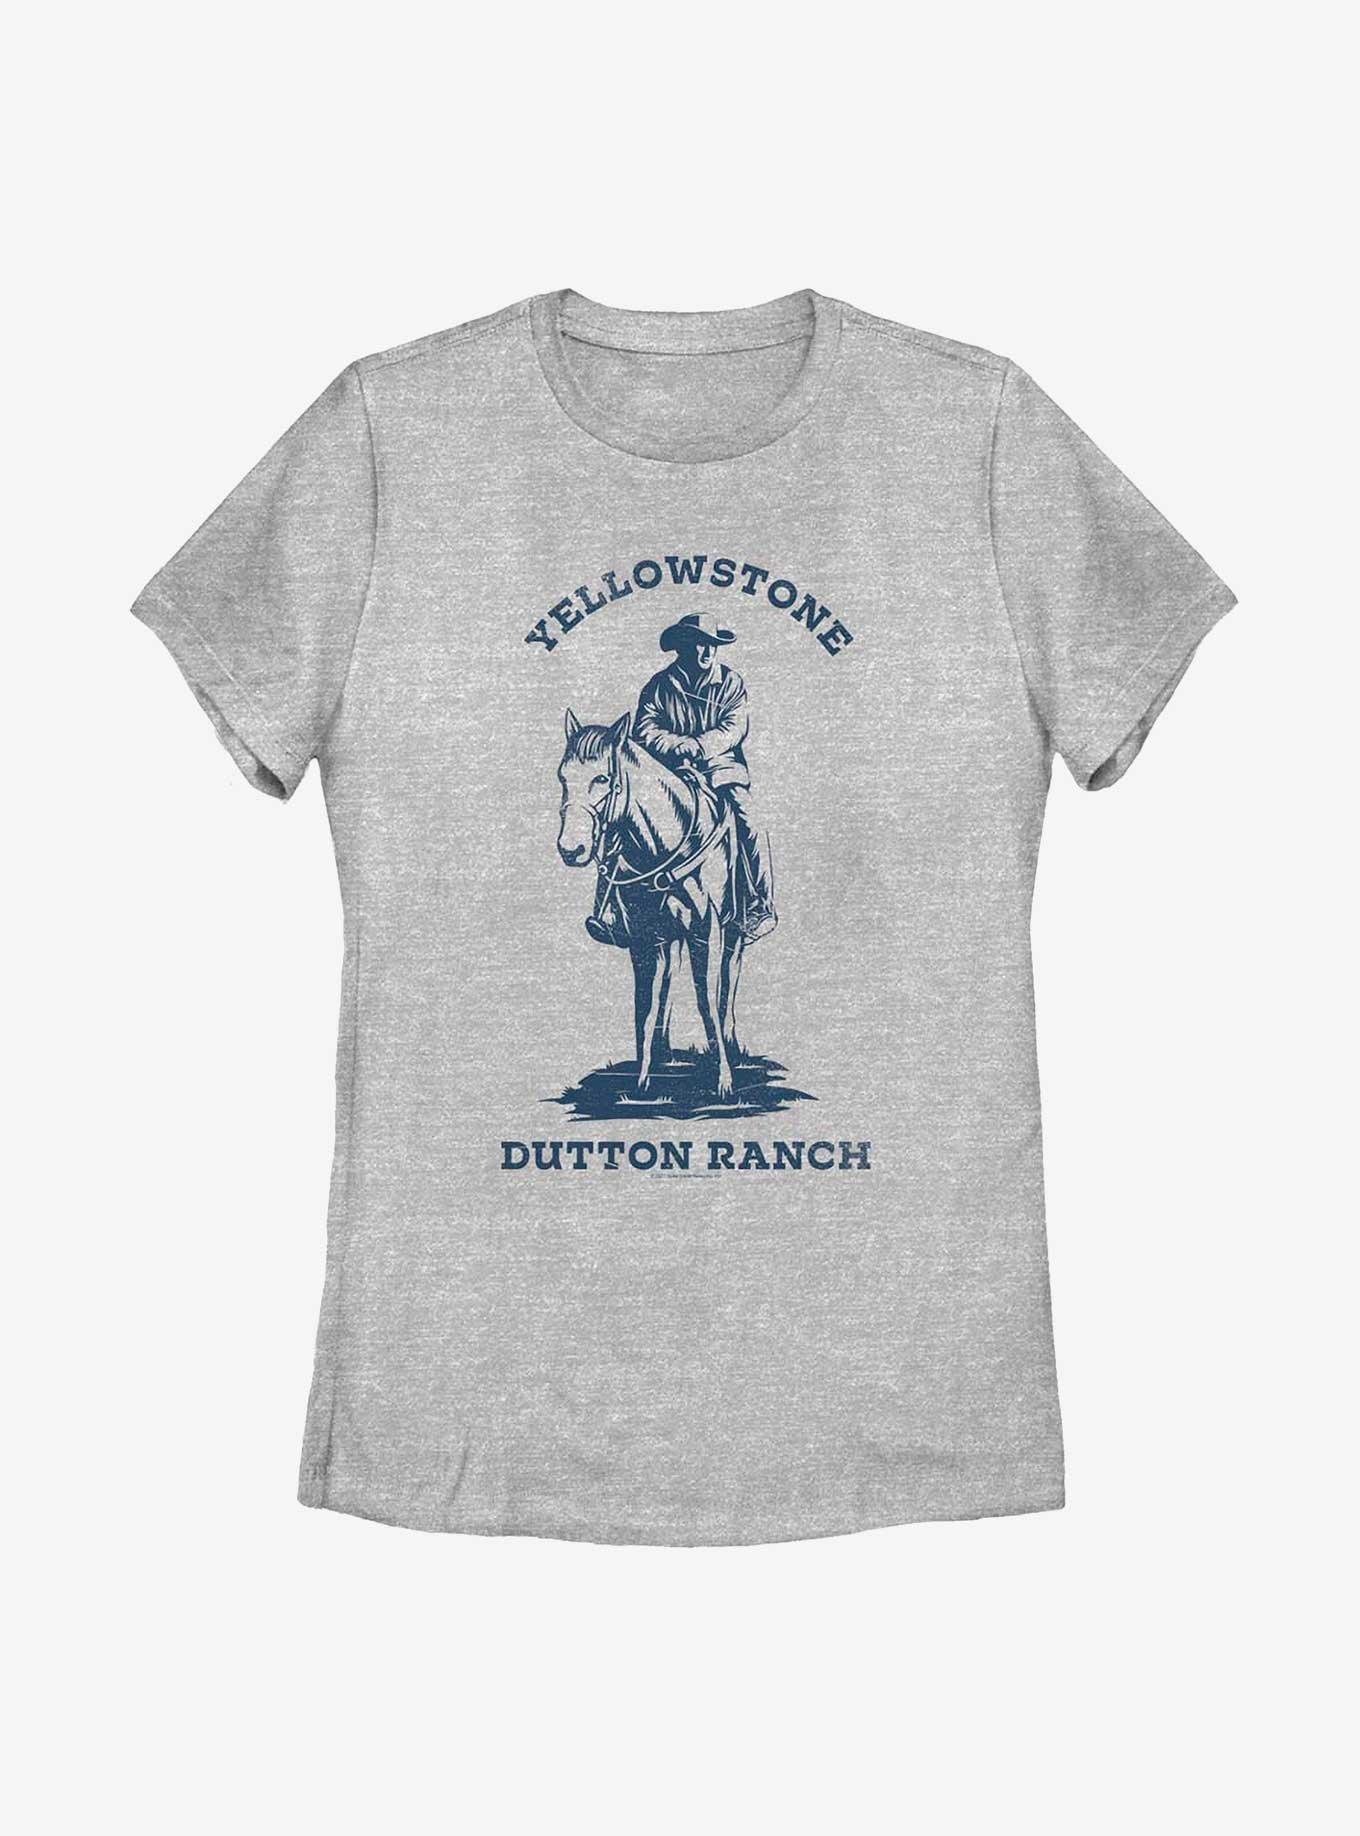 Yellowstone Dutton Ranch Distressed Womens T-Shirt, ATH HTR, hi-res